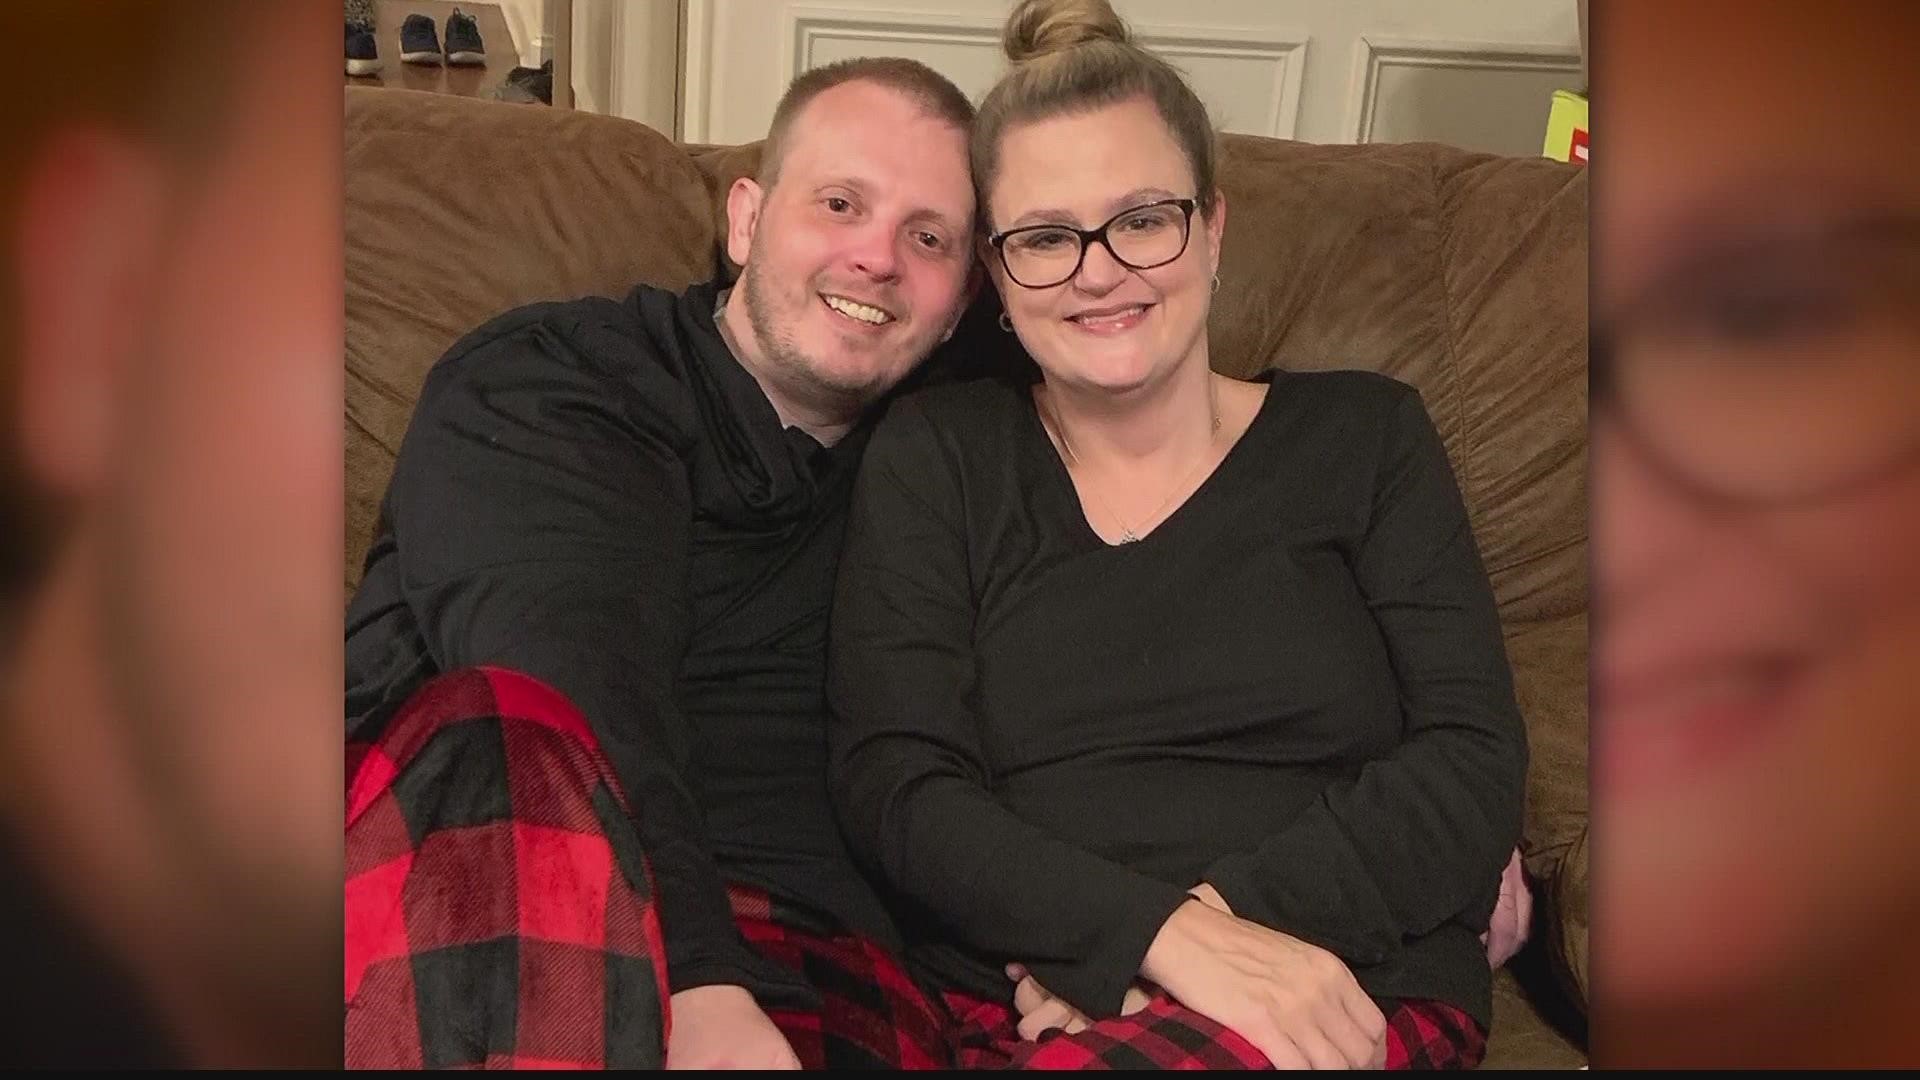 Alicia Freeman, the wife of 41-year-old Wesley Freeman, spoke to 11Alive and described the last day of trying to process her husband's death.